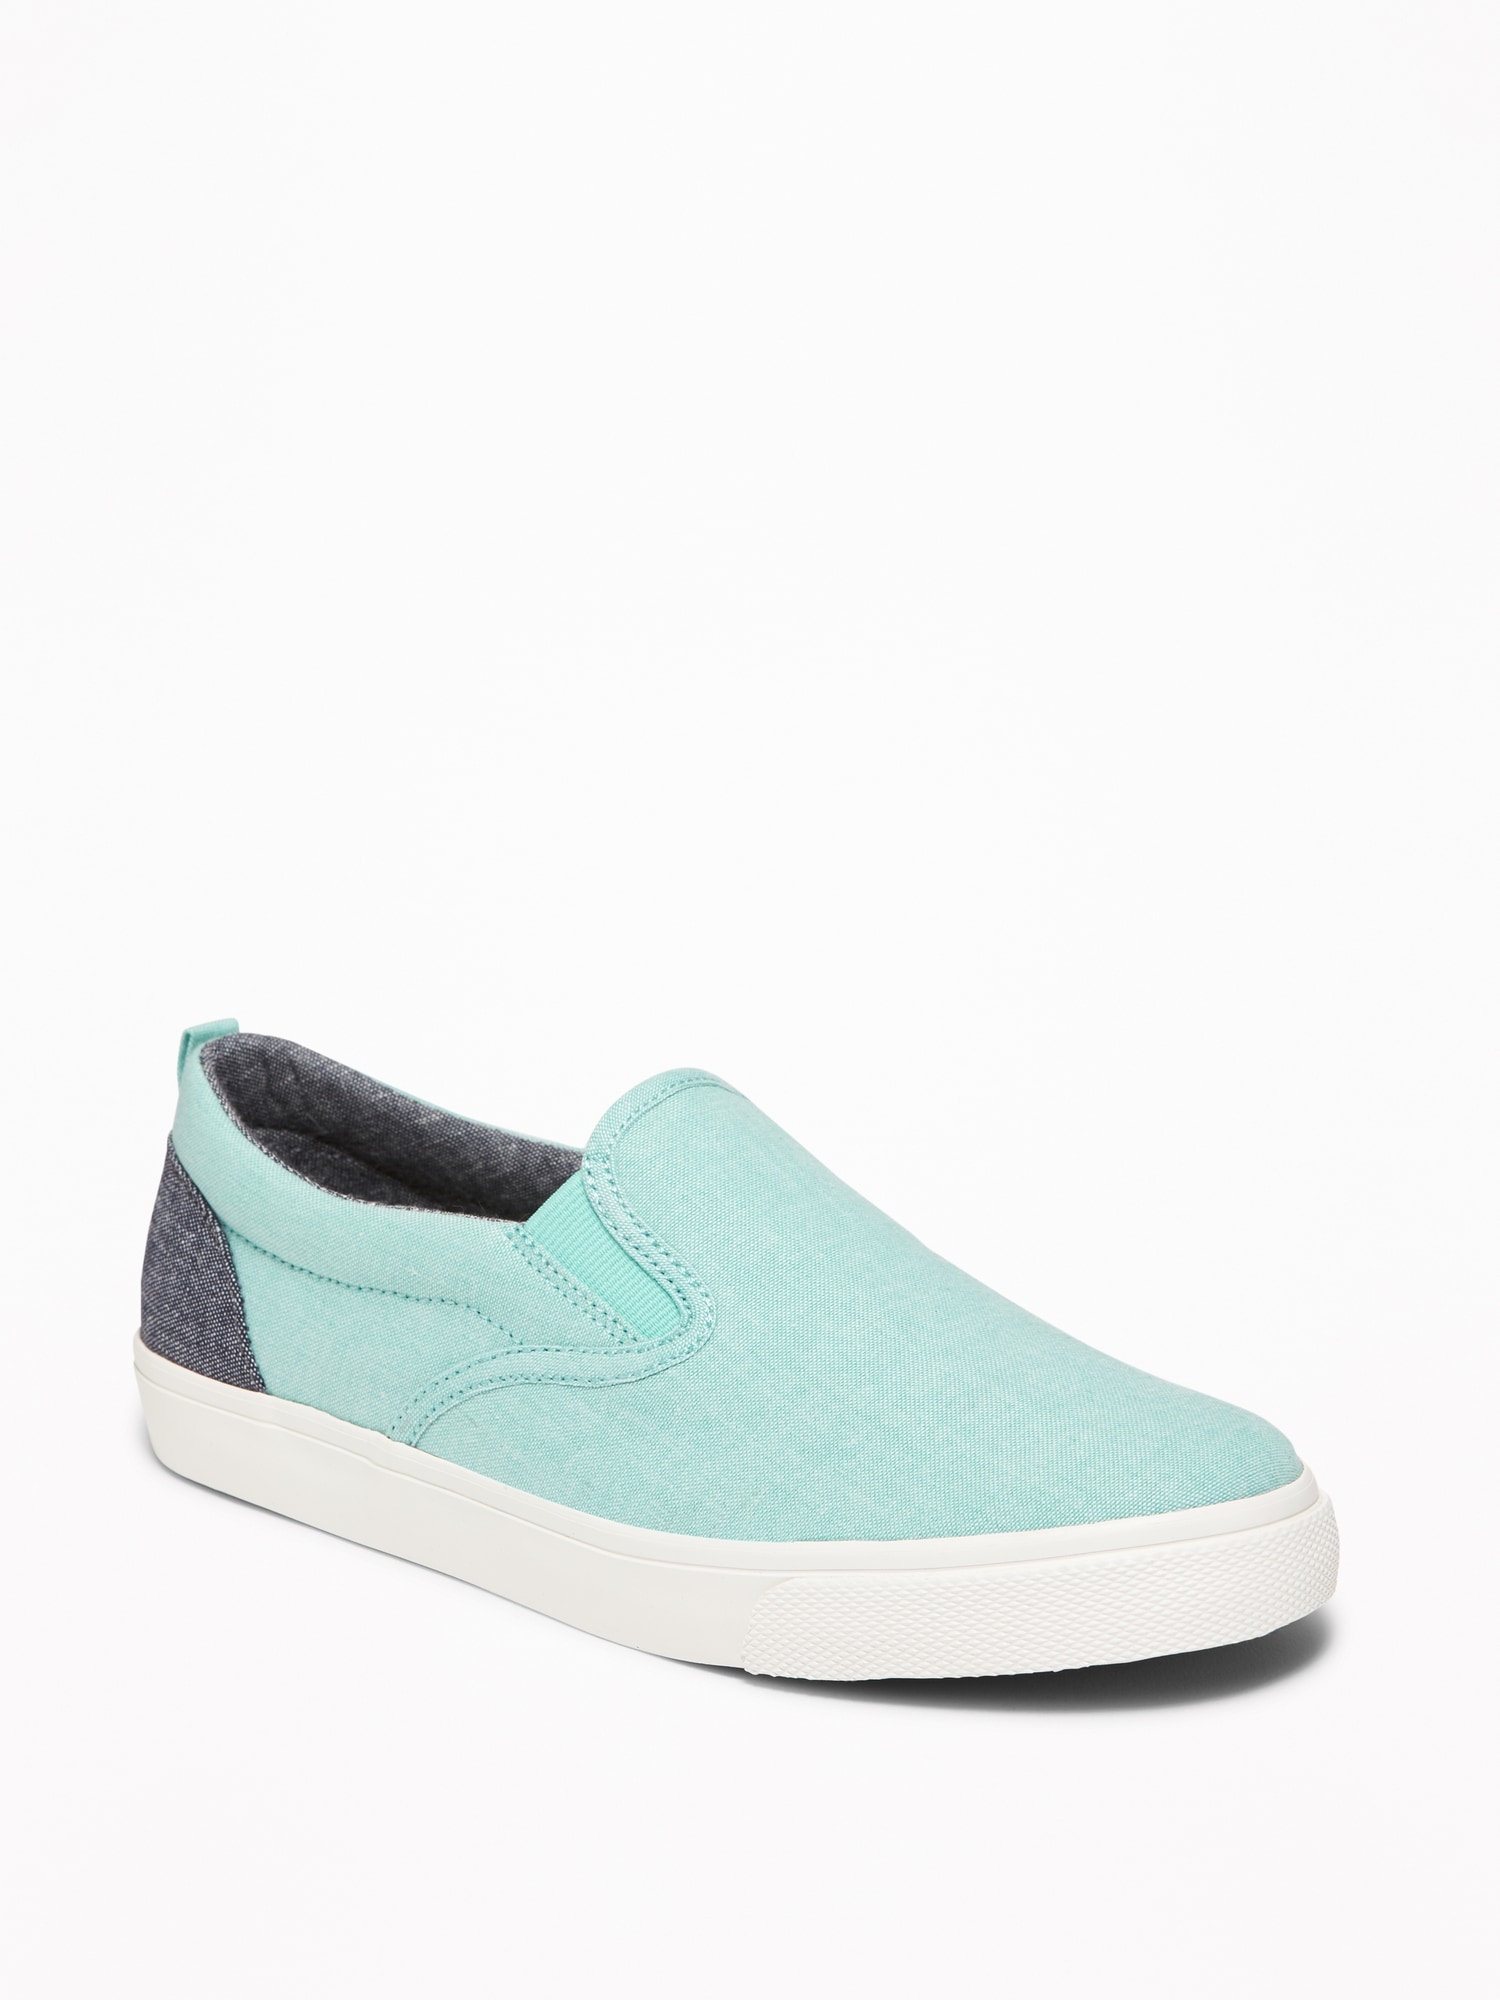 Textured Slip-Ons for Boys | Old Navy